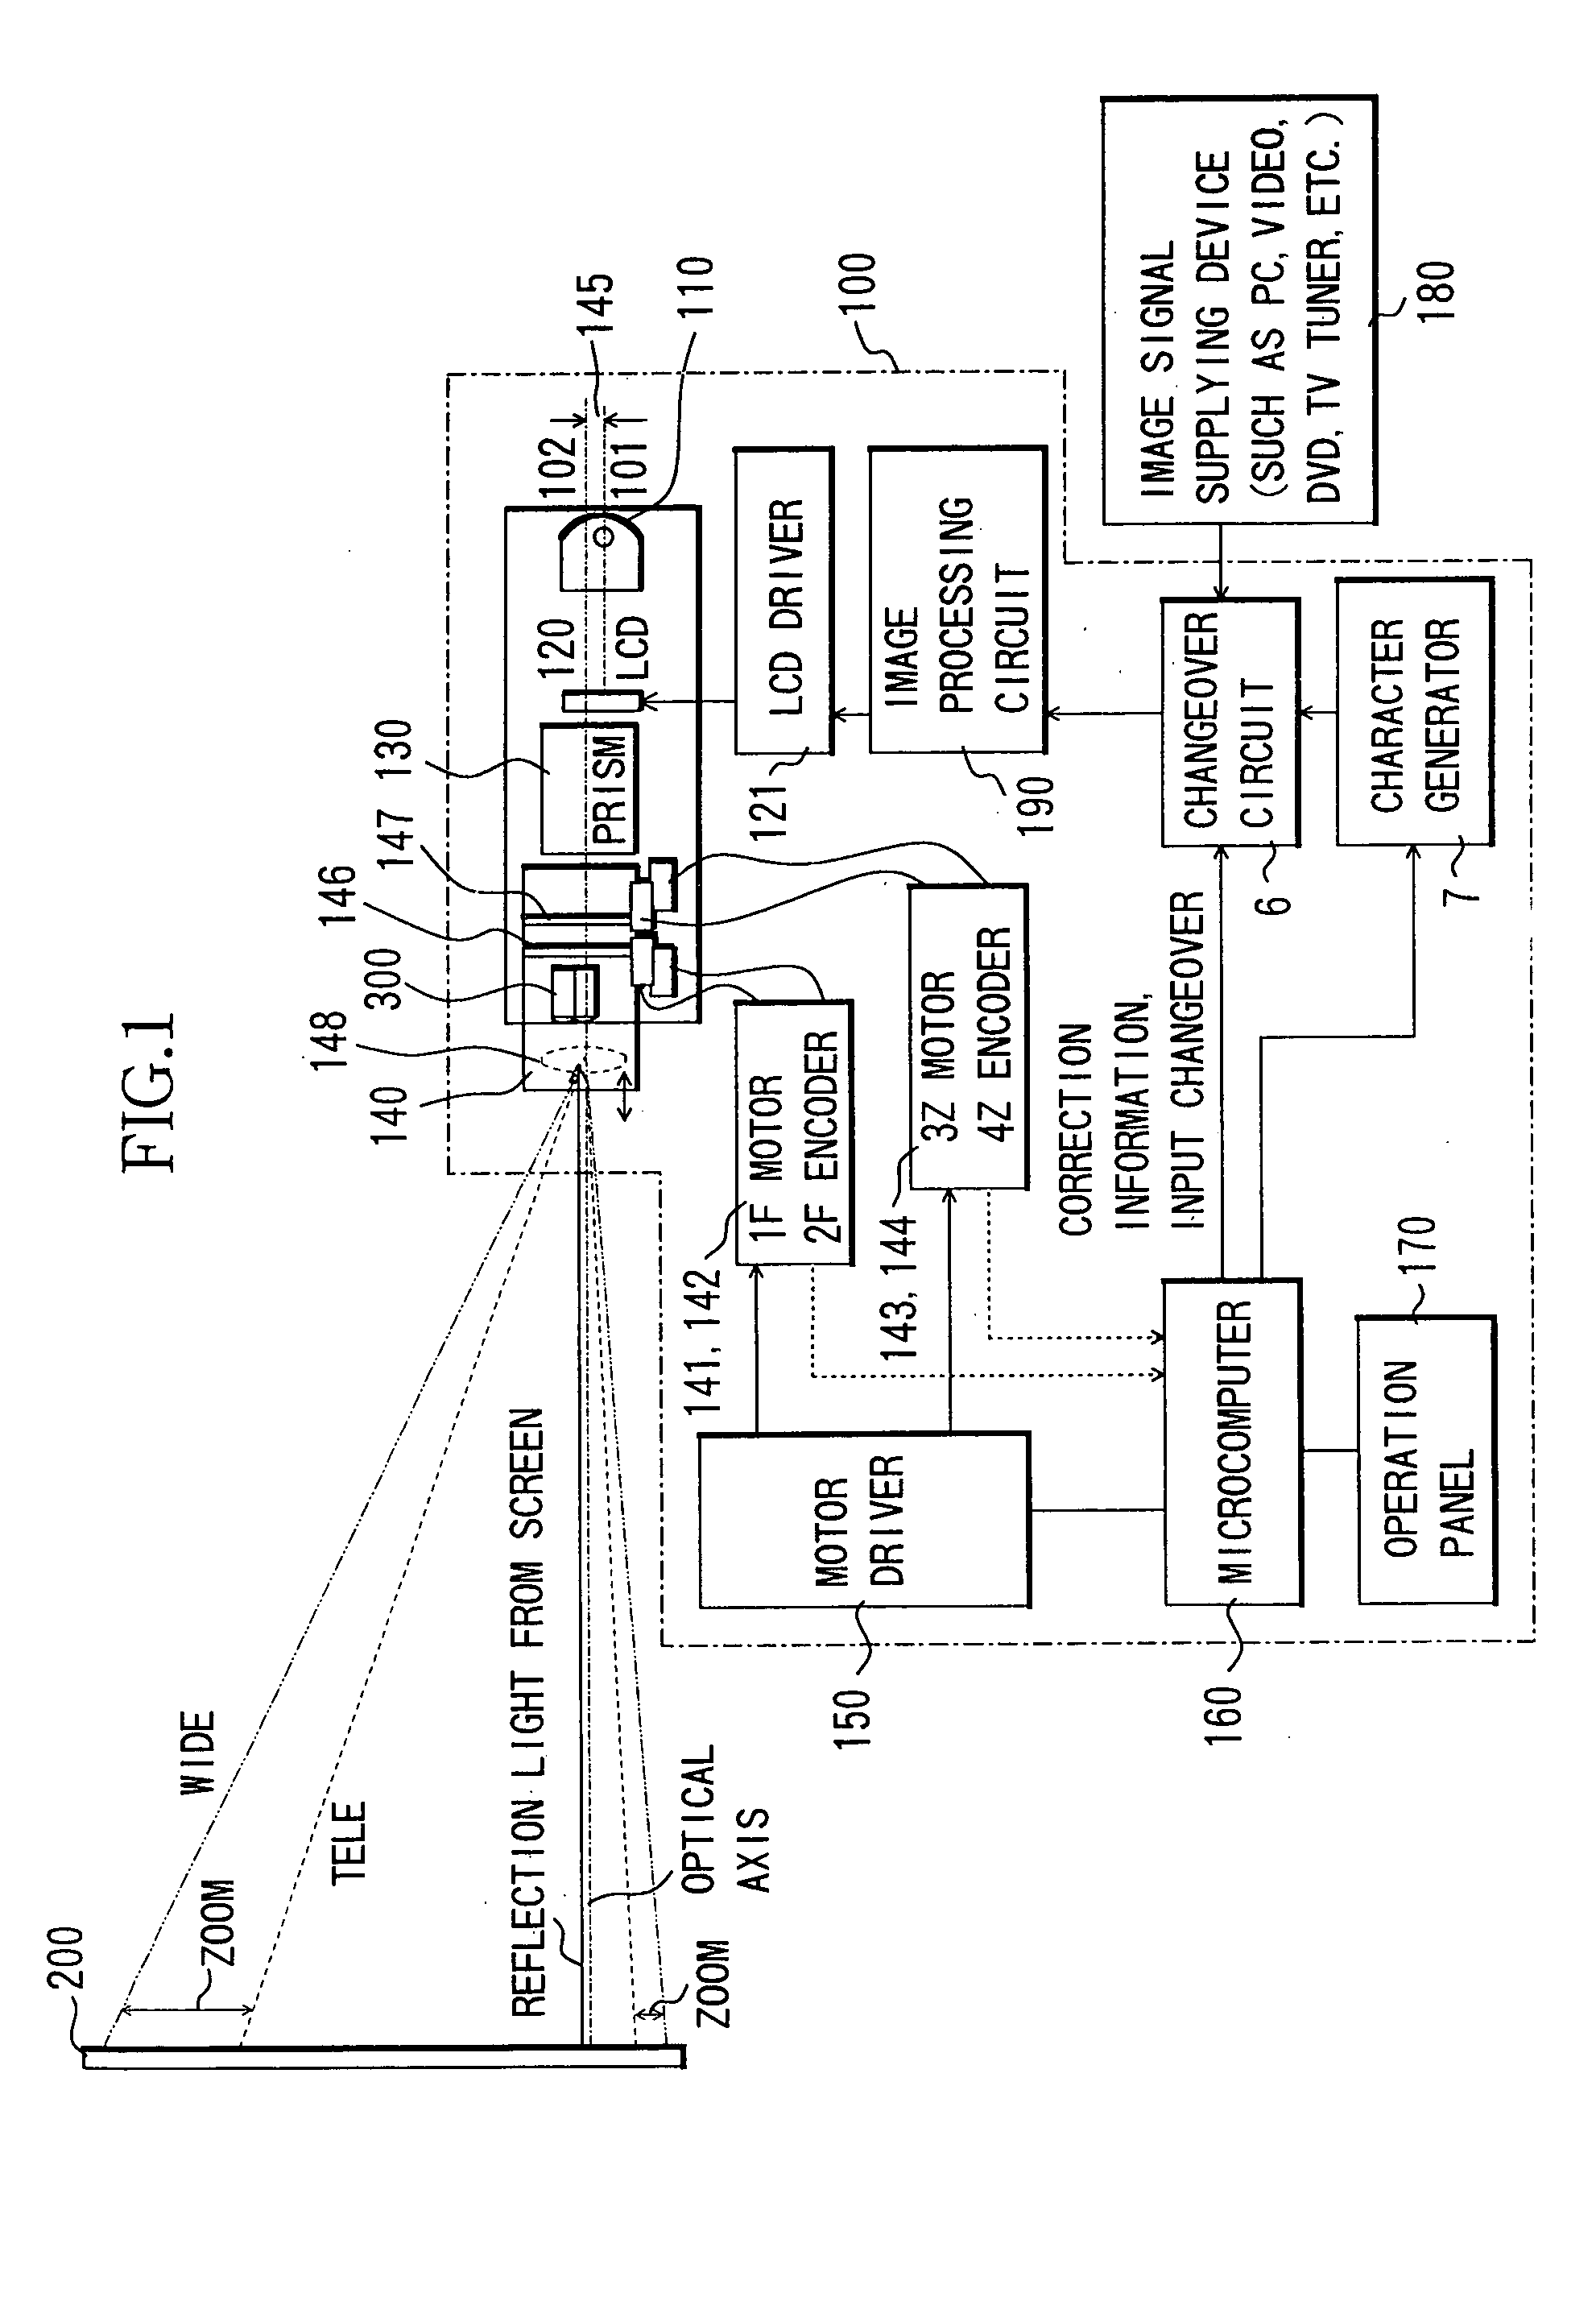 Image-projecting apparatus